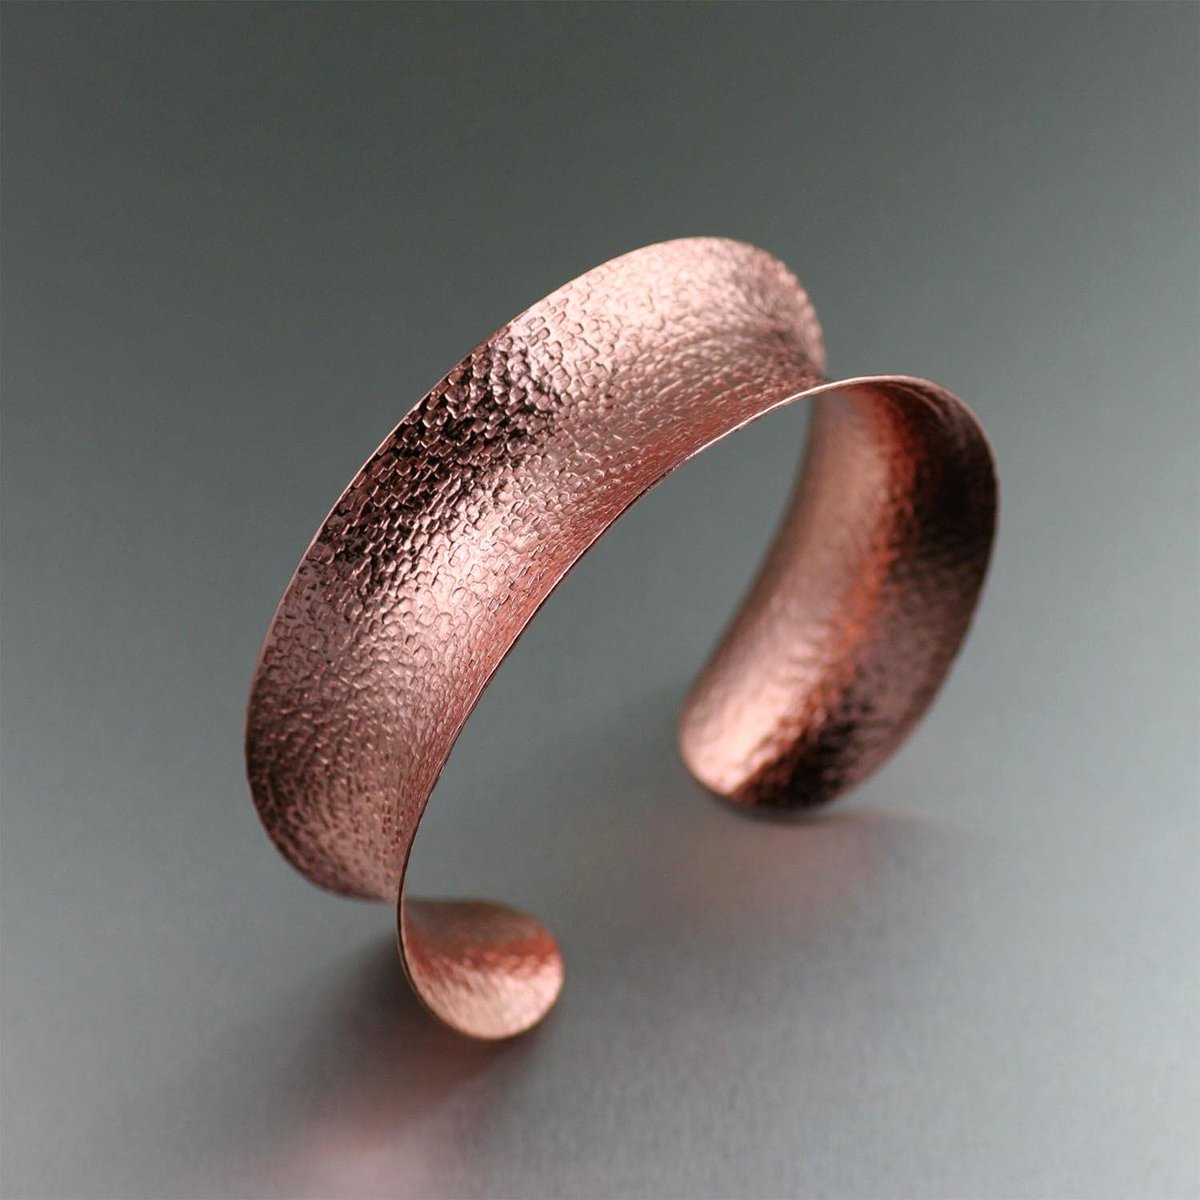 Spectacular Texturized Copper Cuff Highlighted by ilovecopperjewelry.com/anticlastic-te… #CopperAnniversary #StatementJewelry